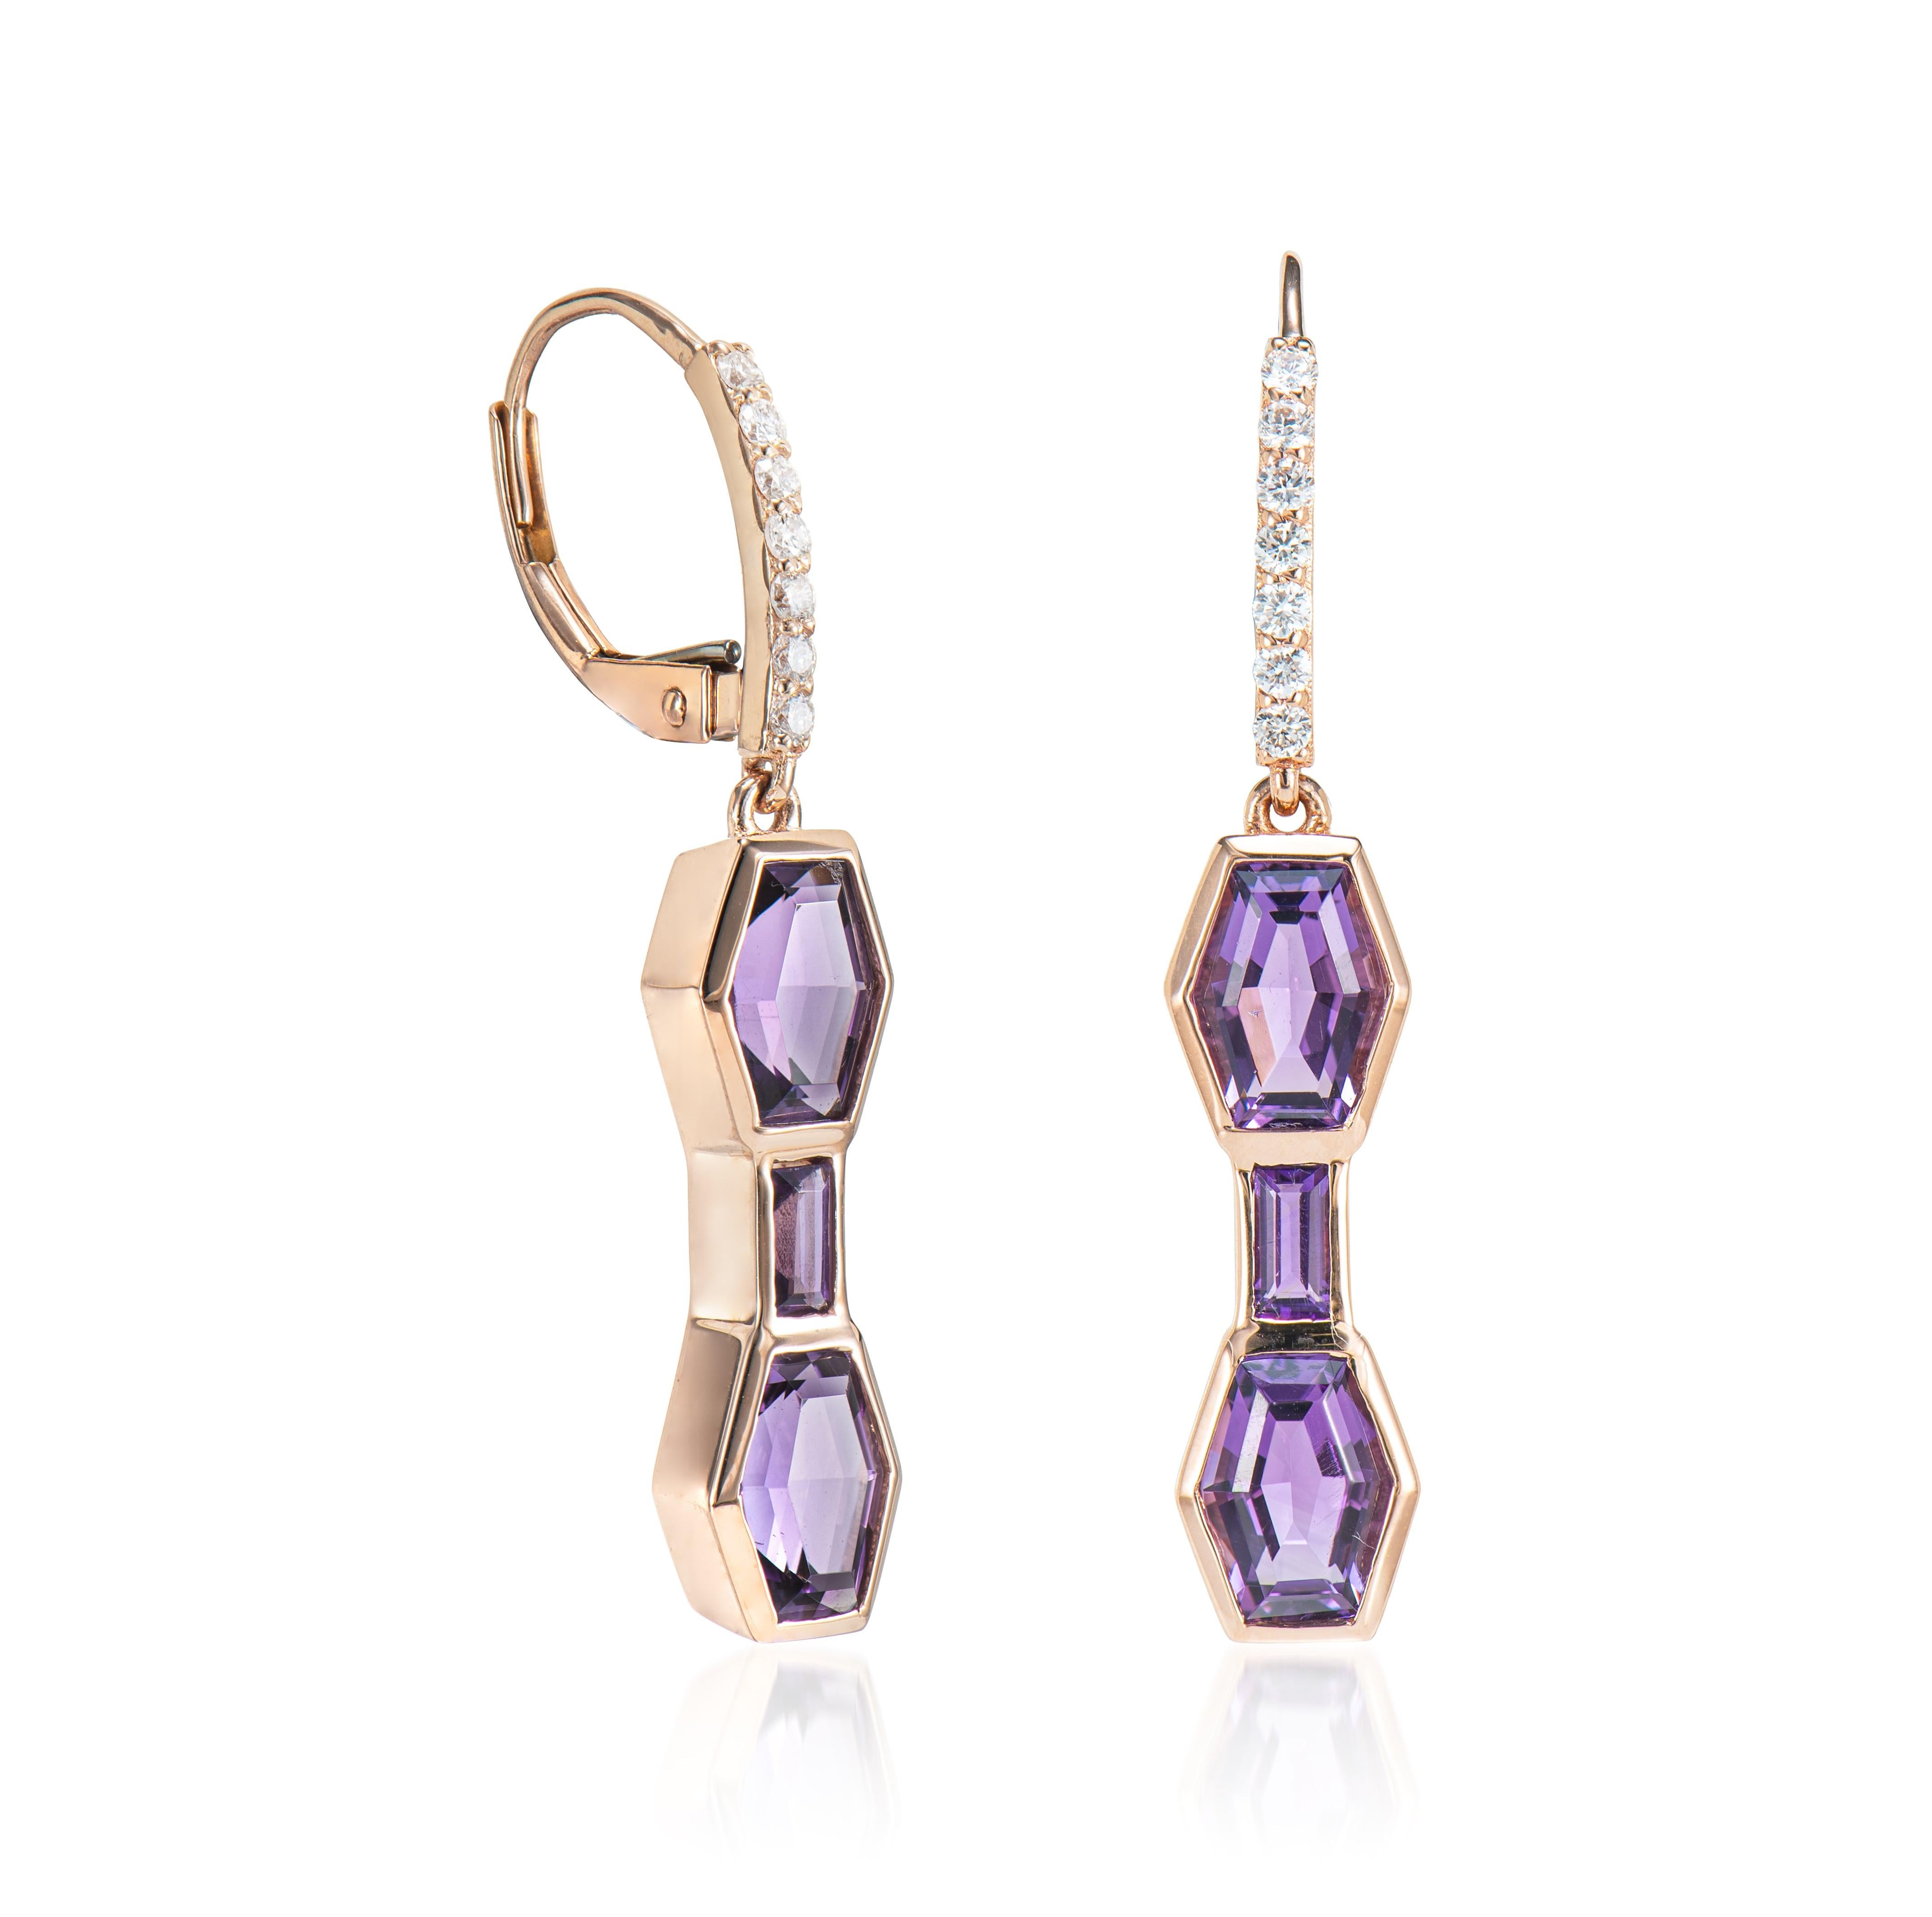 These are Fancy Amethyst Drop Earrings in Hexagon shape with purple hue. These rose gold drop earrings have a timeless, elegant appearance and can be worn on different occasions.

Amethyst Drop Earrings in 14Karat Rose Gold with White